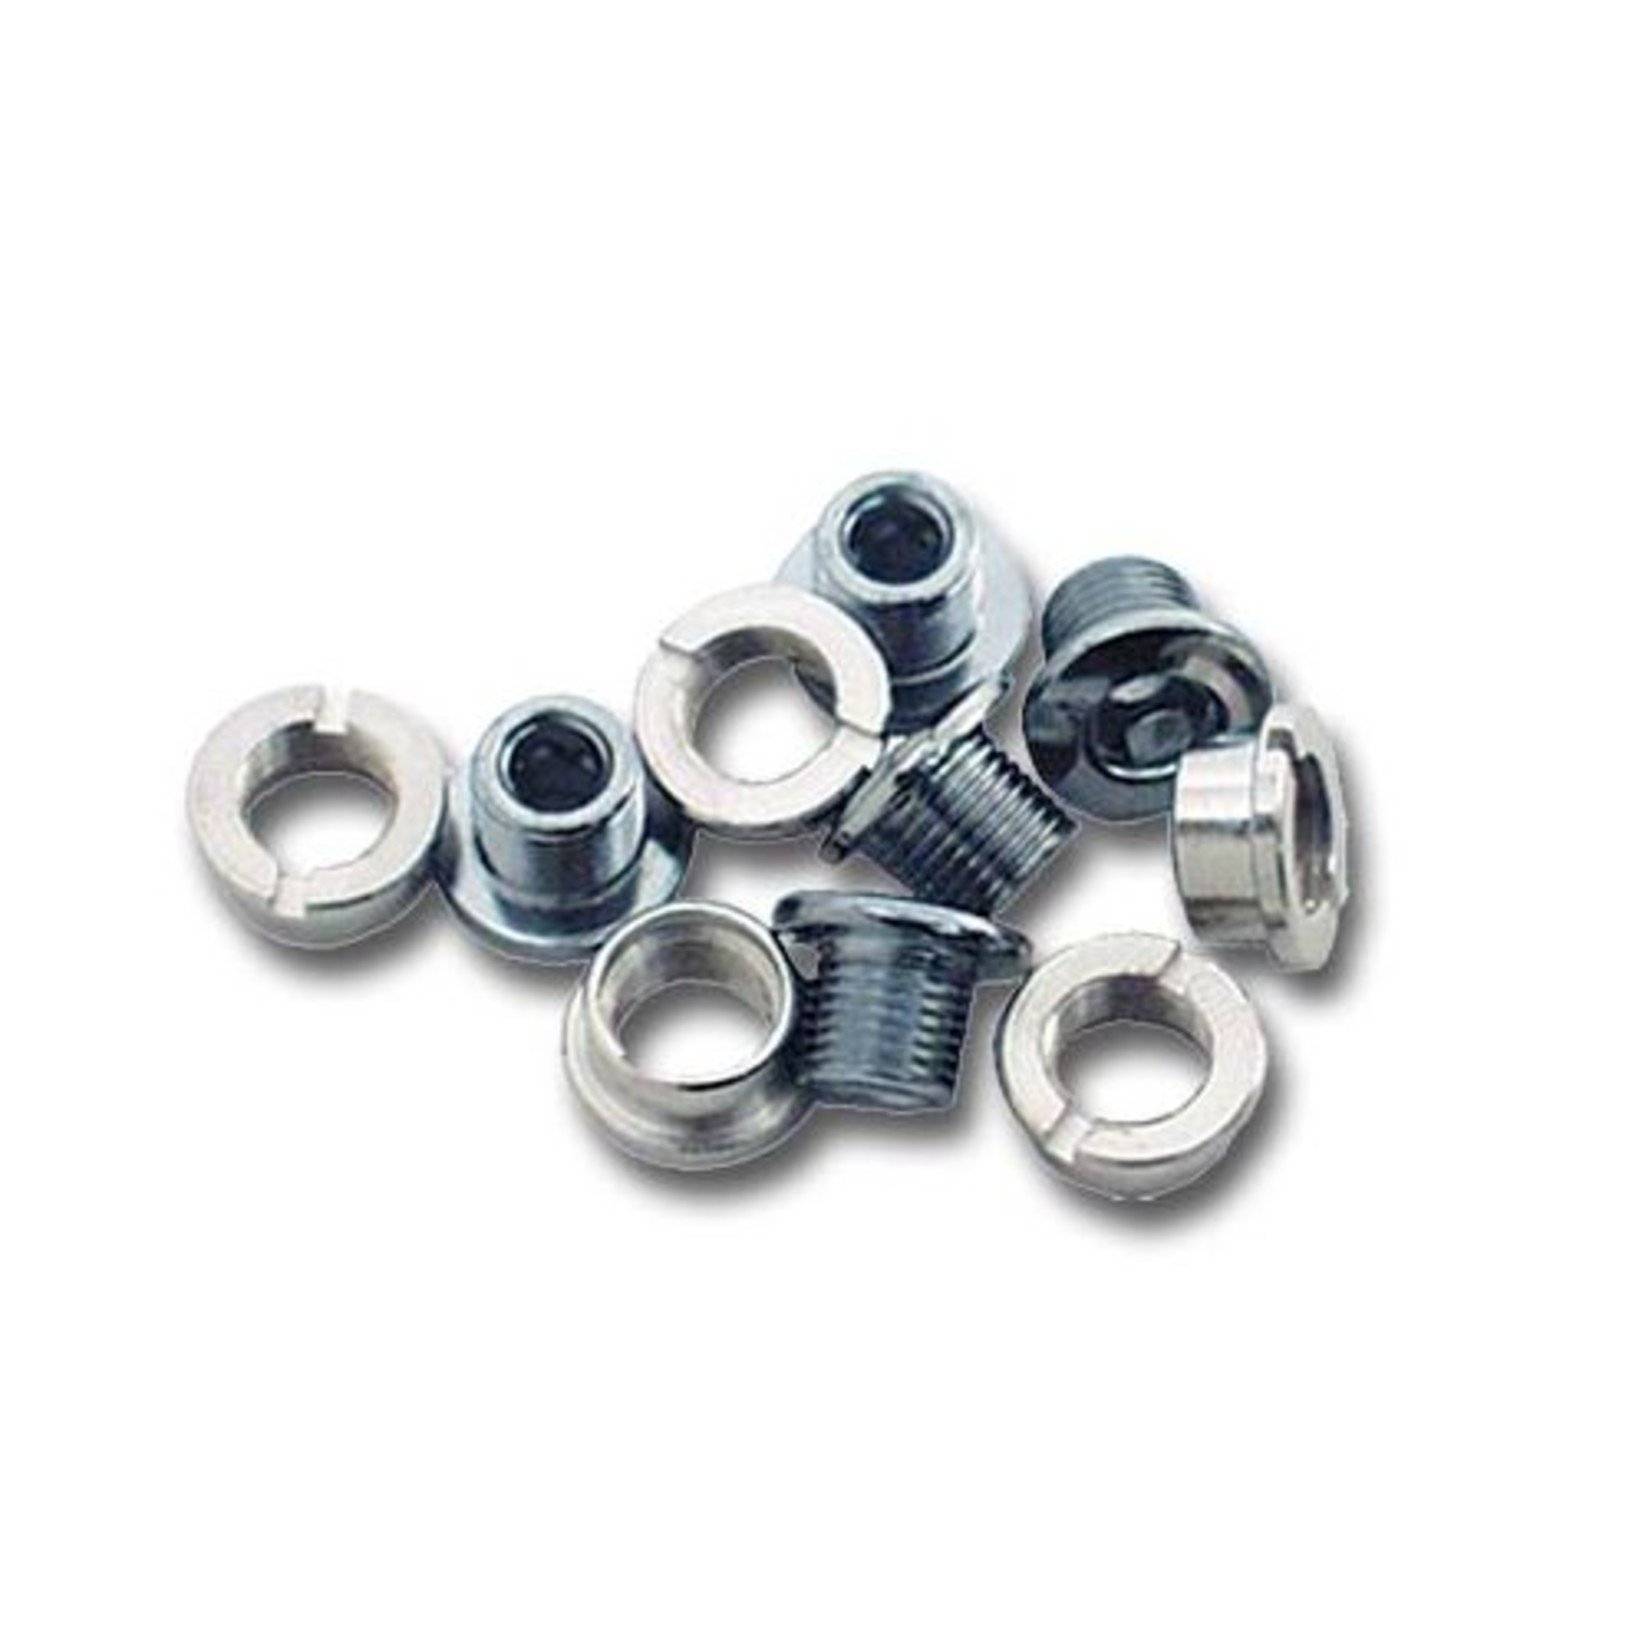 MCS Bicycles MCS Chainring Bolts Set of 5 Chrome